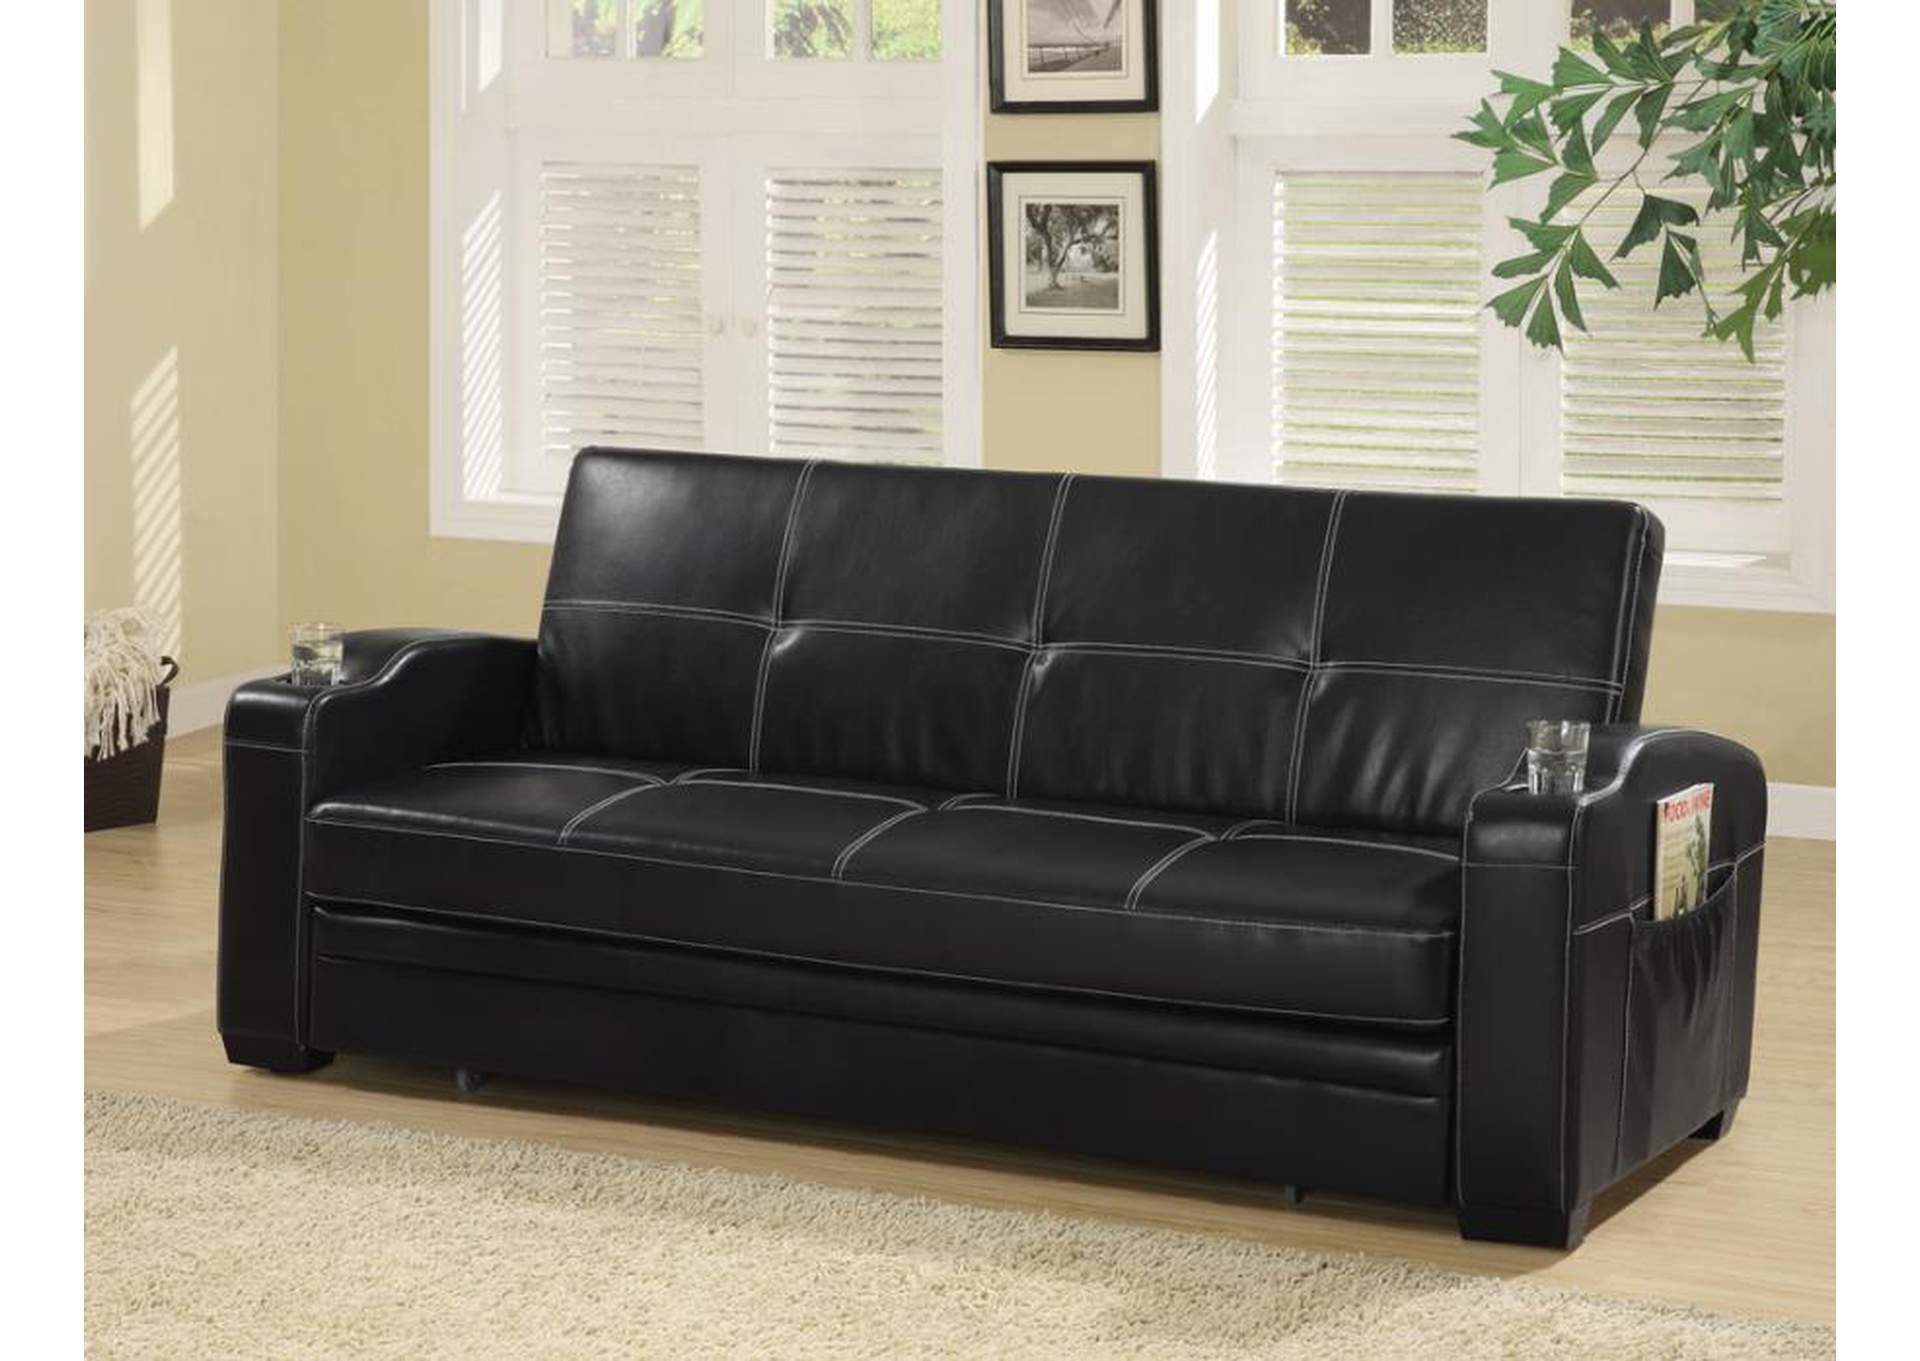 Avril Upholstered Sleeper Sofa Bed with Cup Holders Black,Coaster Furniture